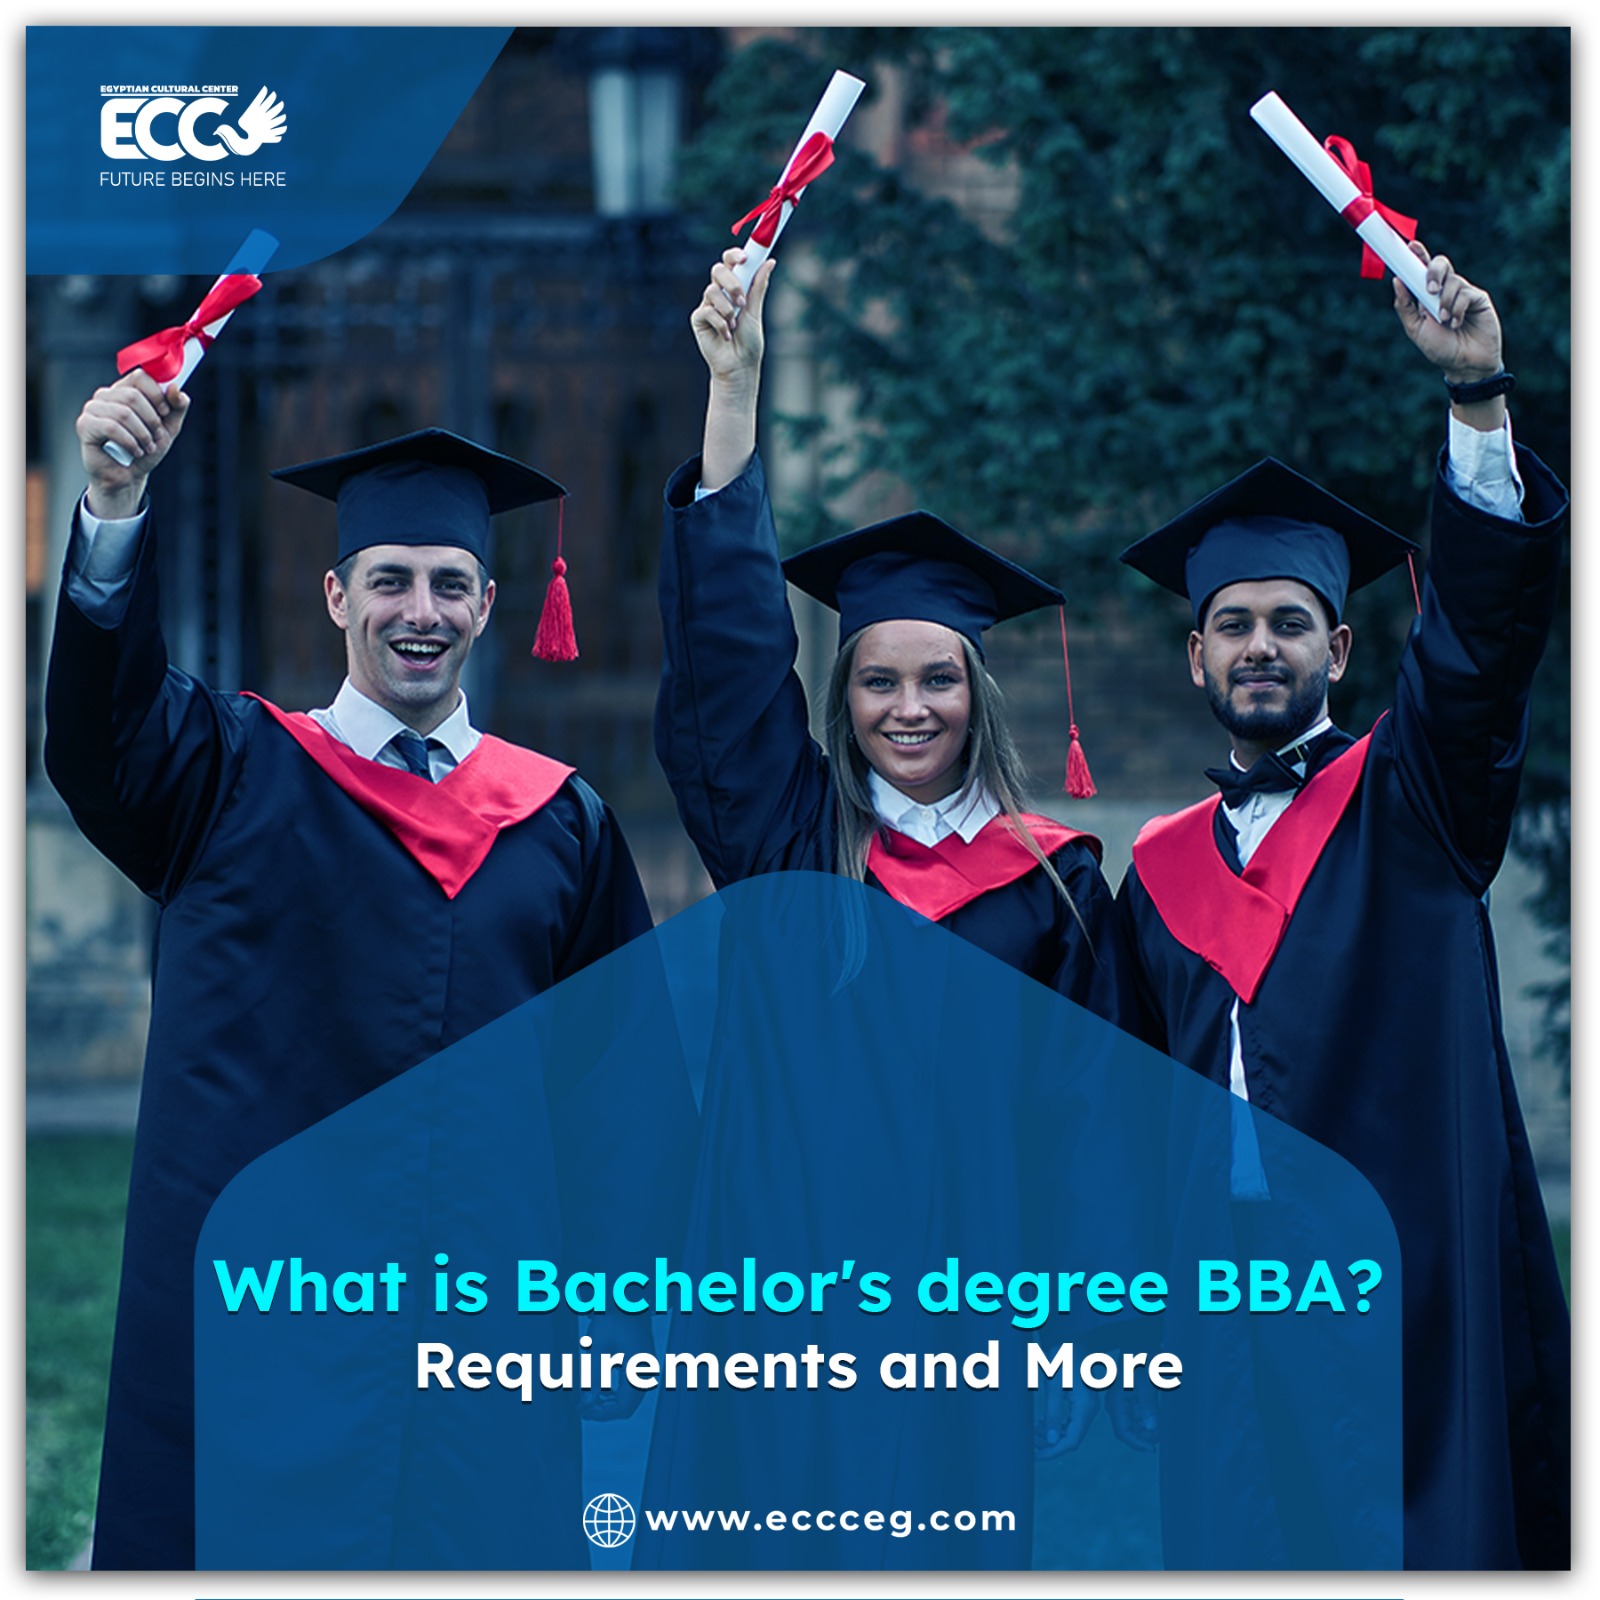 What Is a Bachelor’s Degree BBA? Requirements, and More